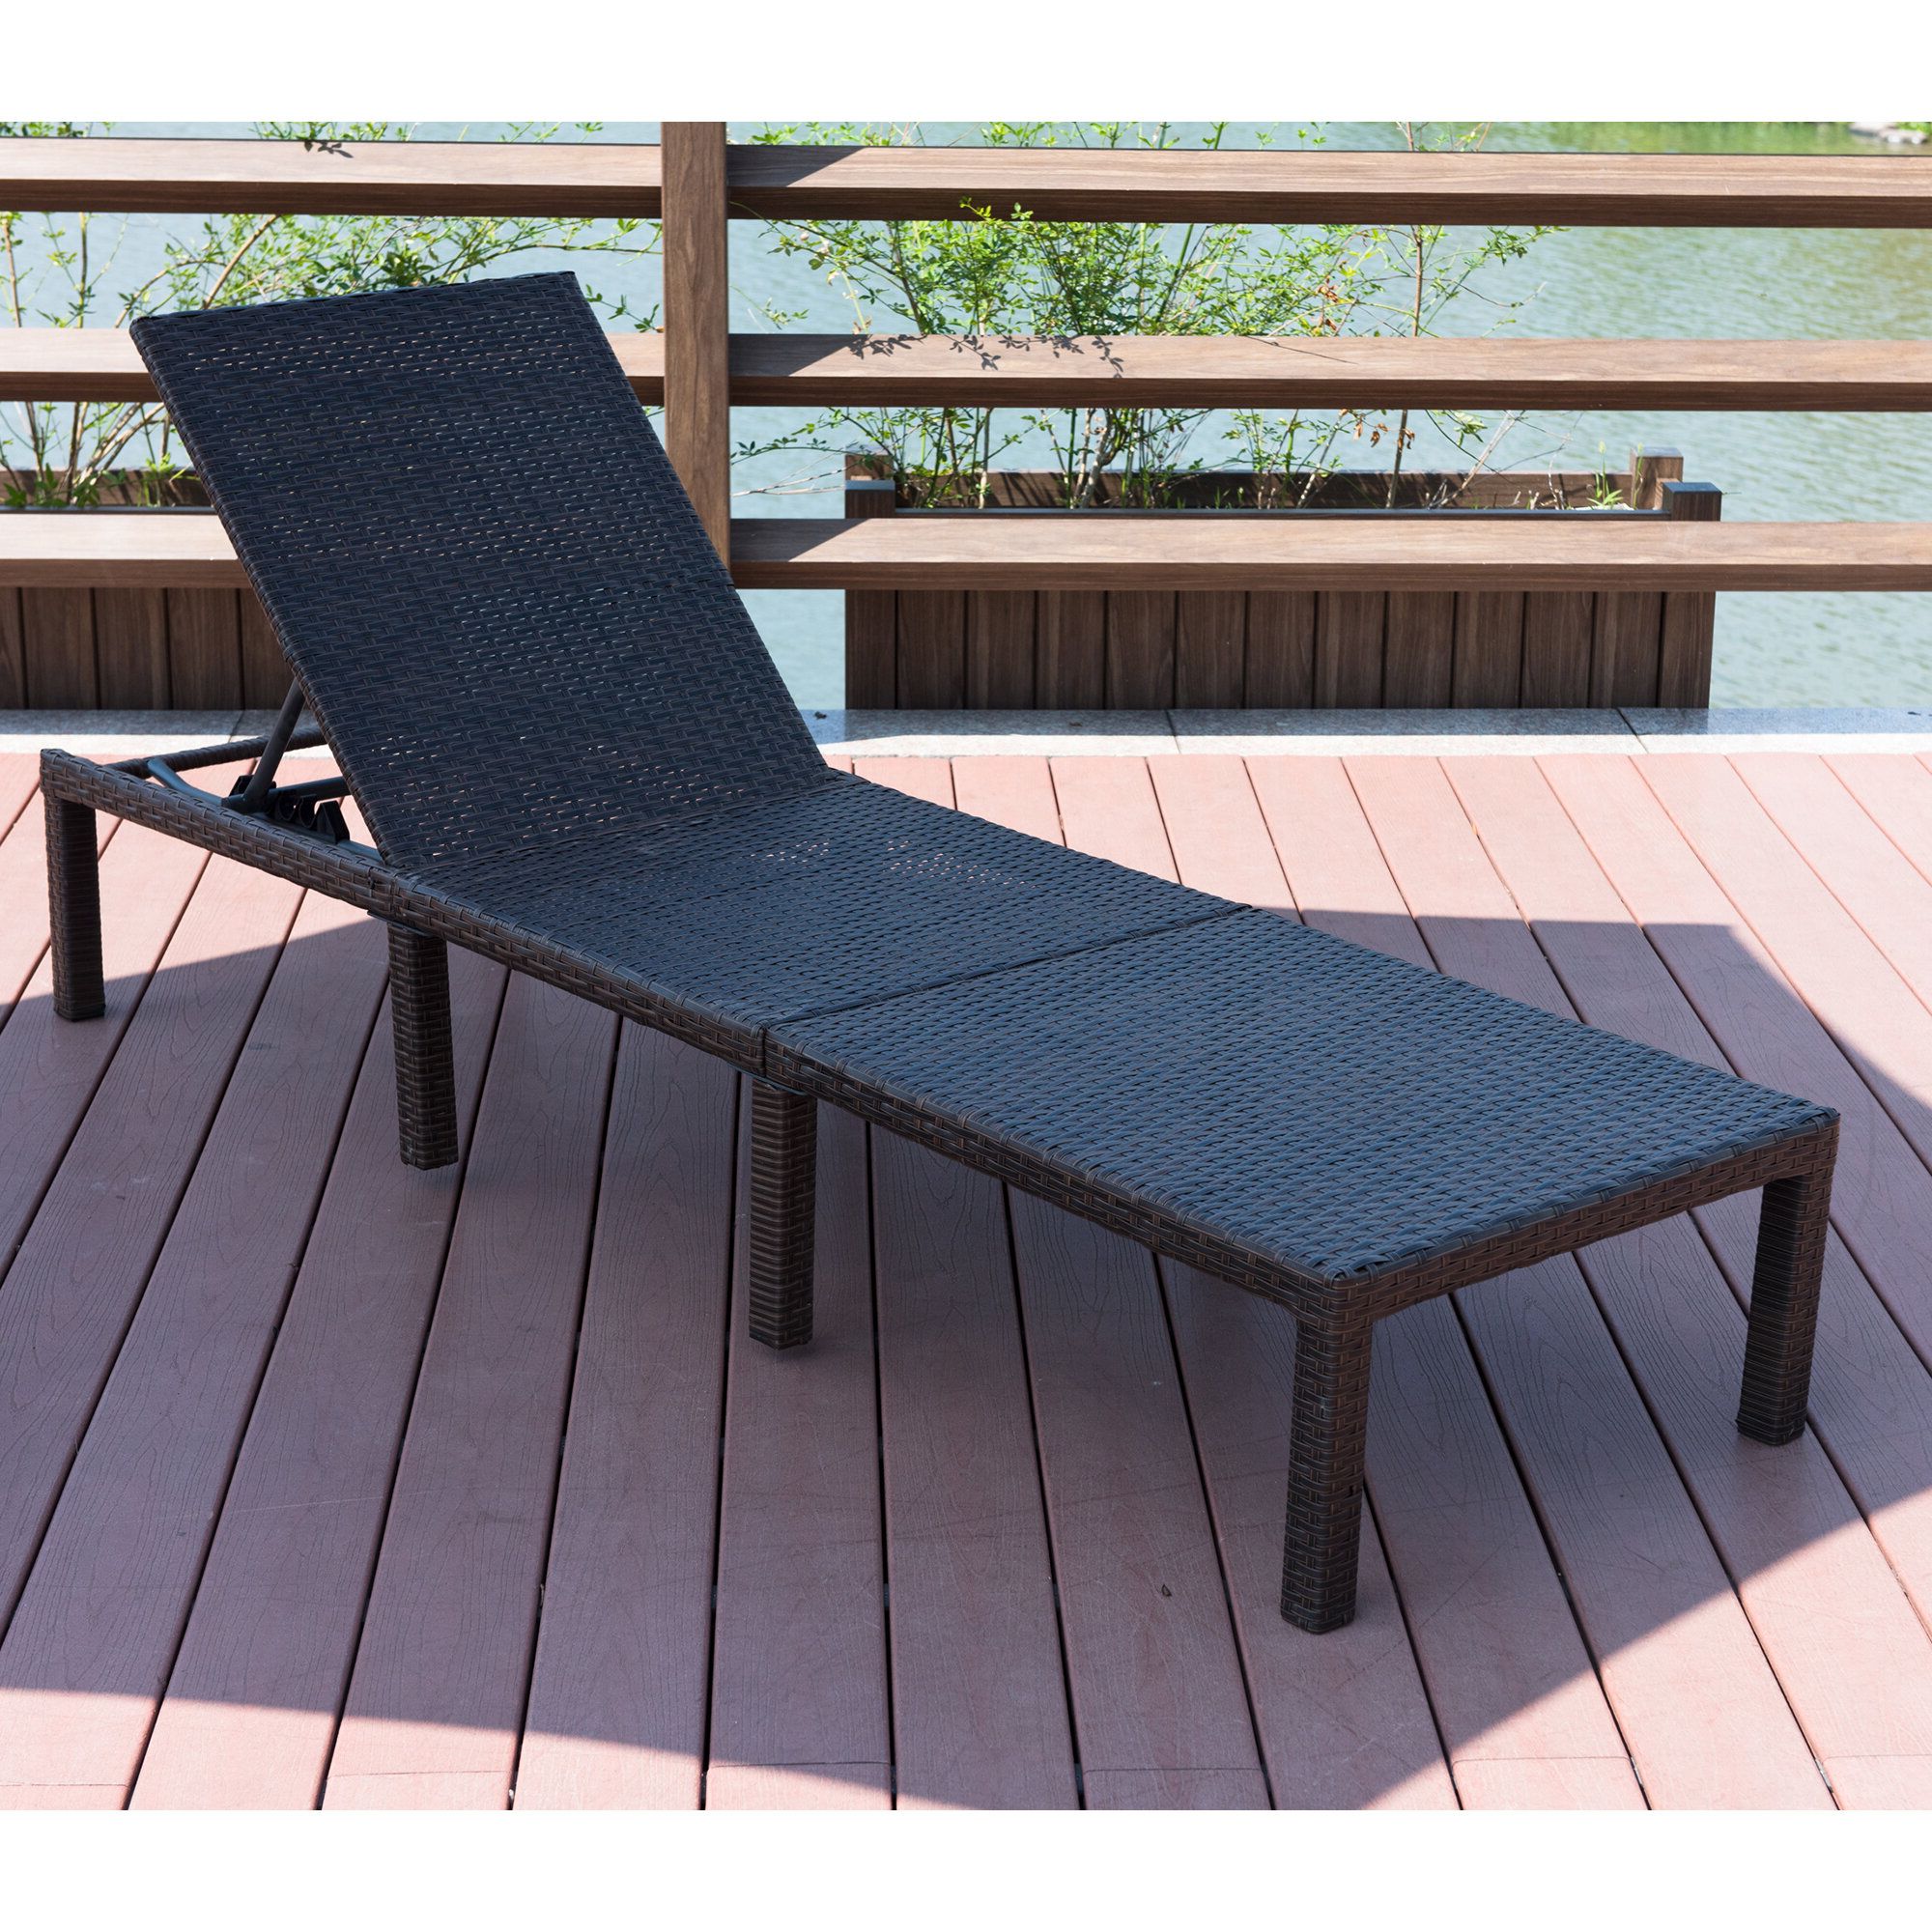 Cavin Adjustable Wicker Chaise Lounge With Cushion For Favorite Adjustable Outdoor Wicker Chaise Lounge Chairs With Cushion (View 10 of 25)